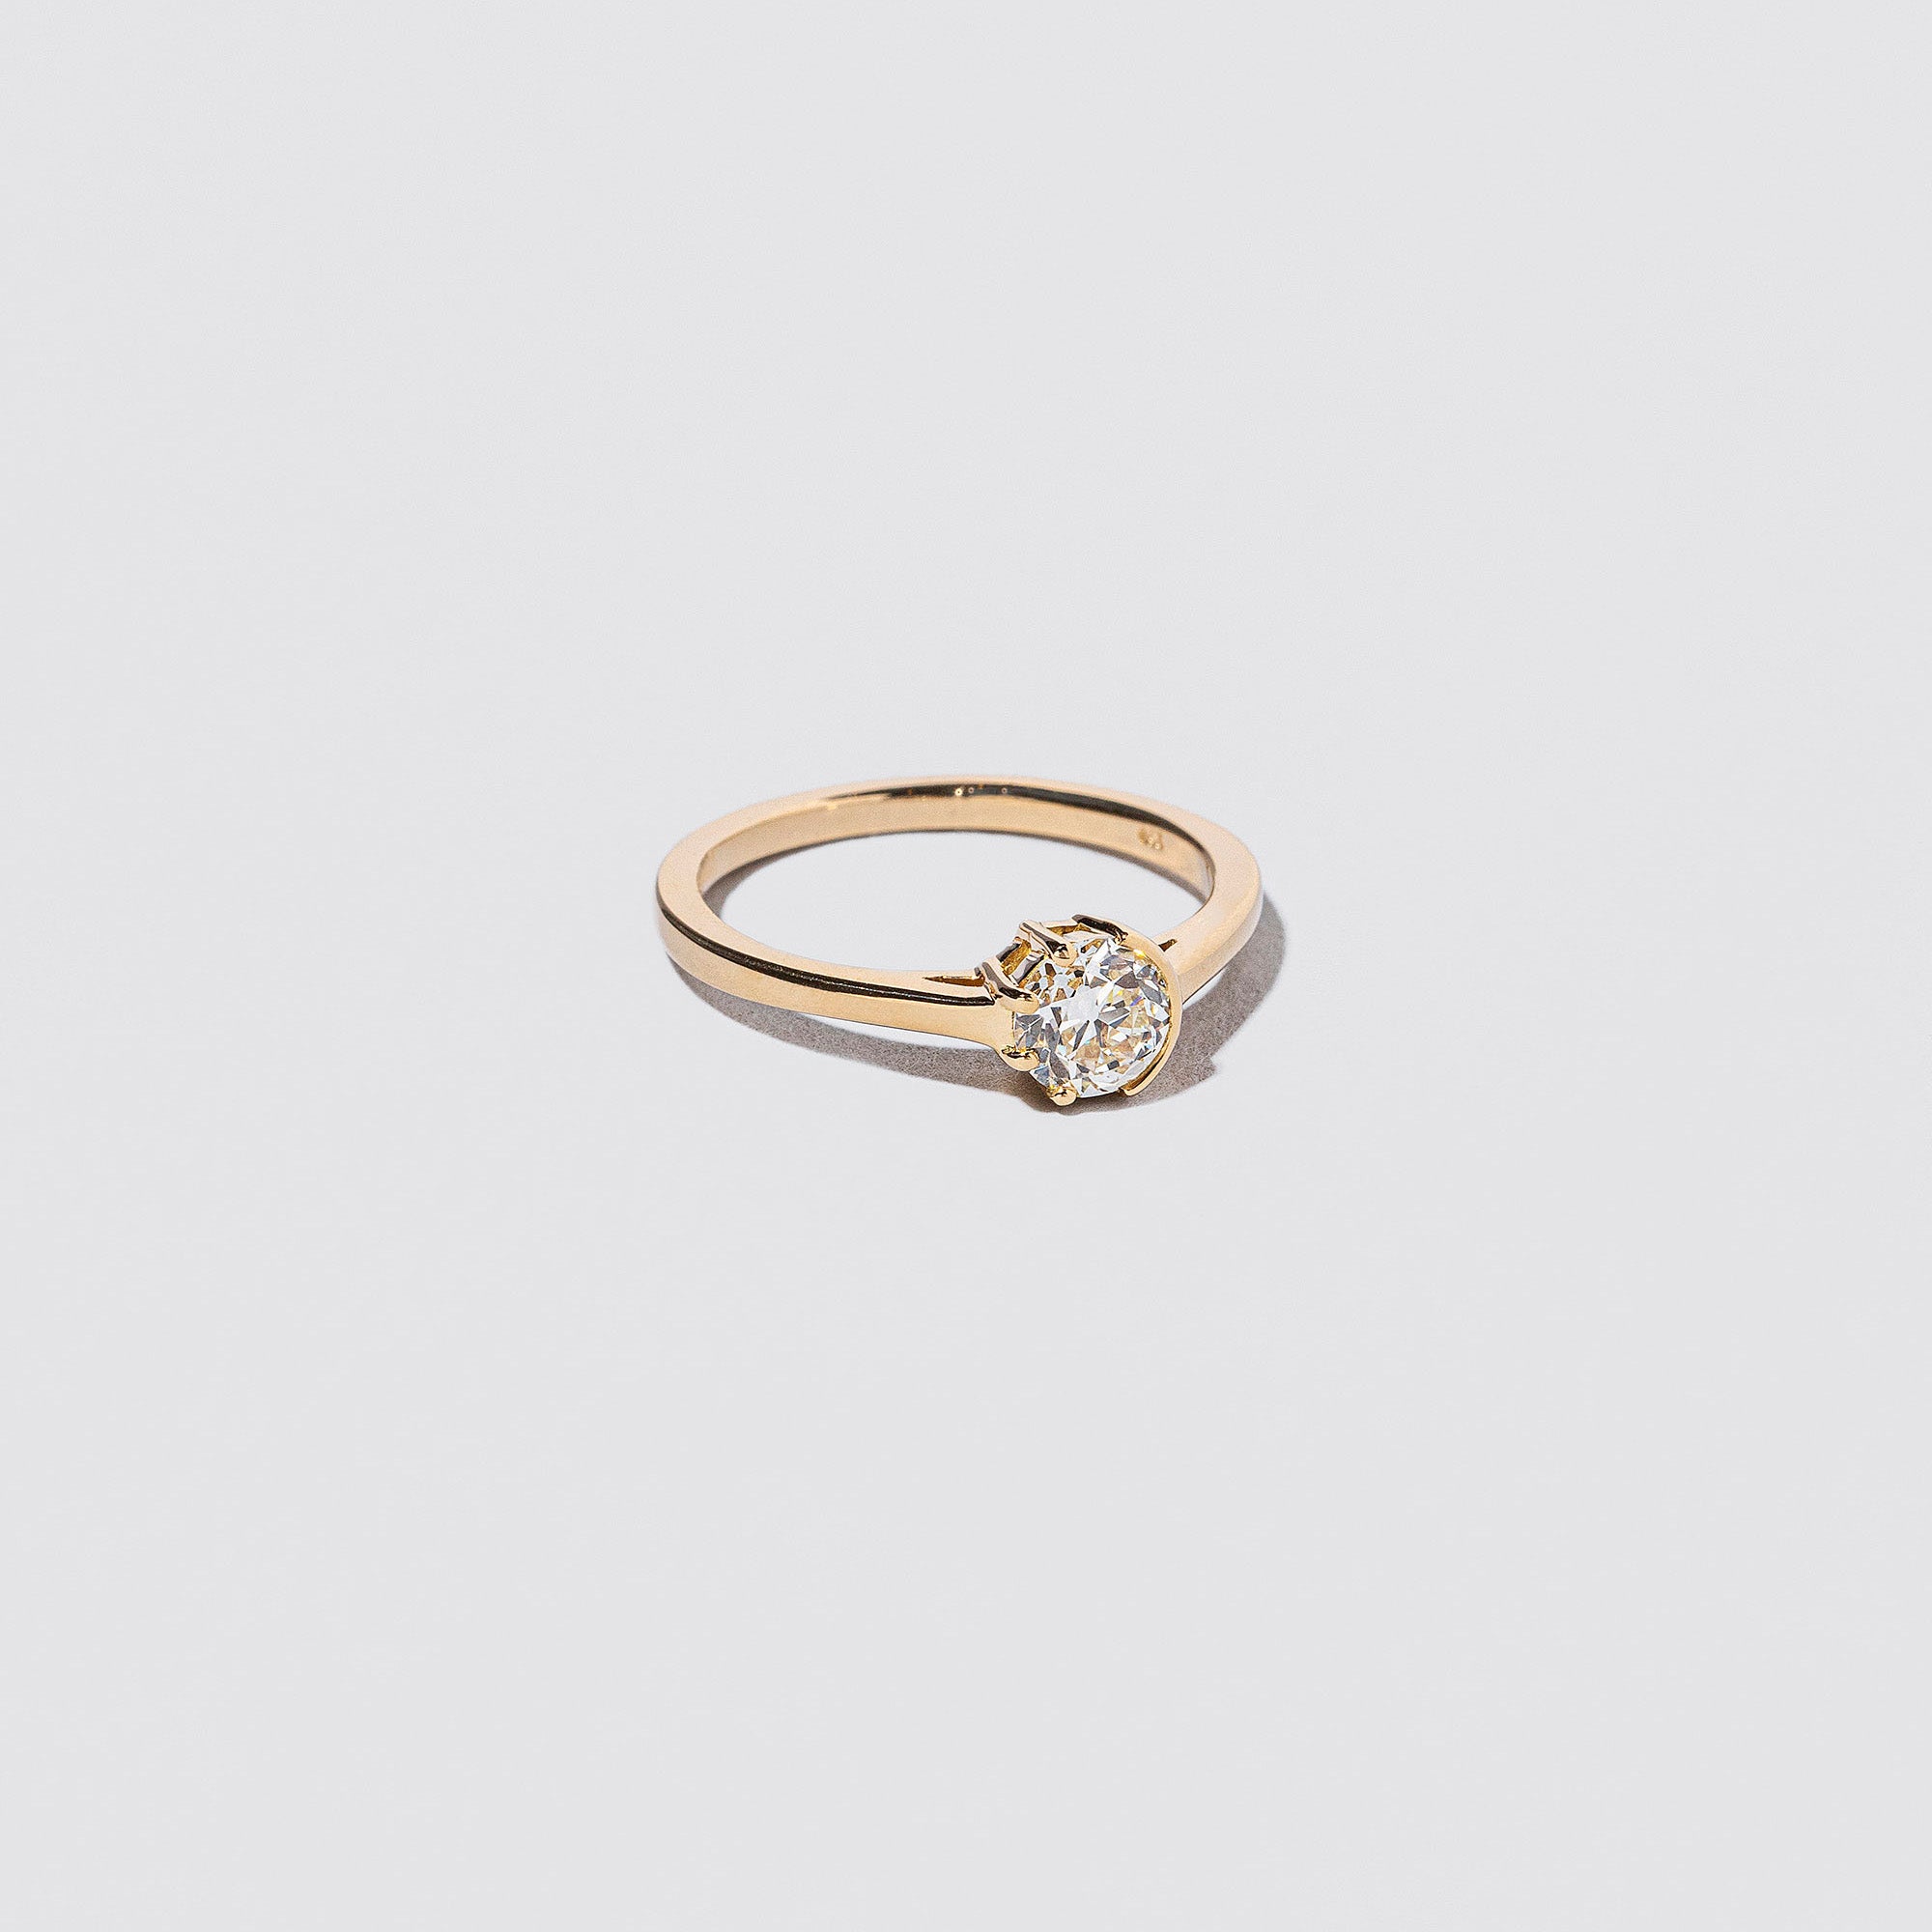 product_details::Sun & Moon Ring - White Diamond on light color background.